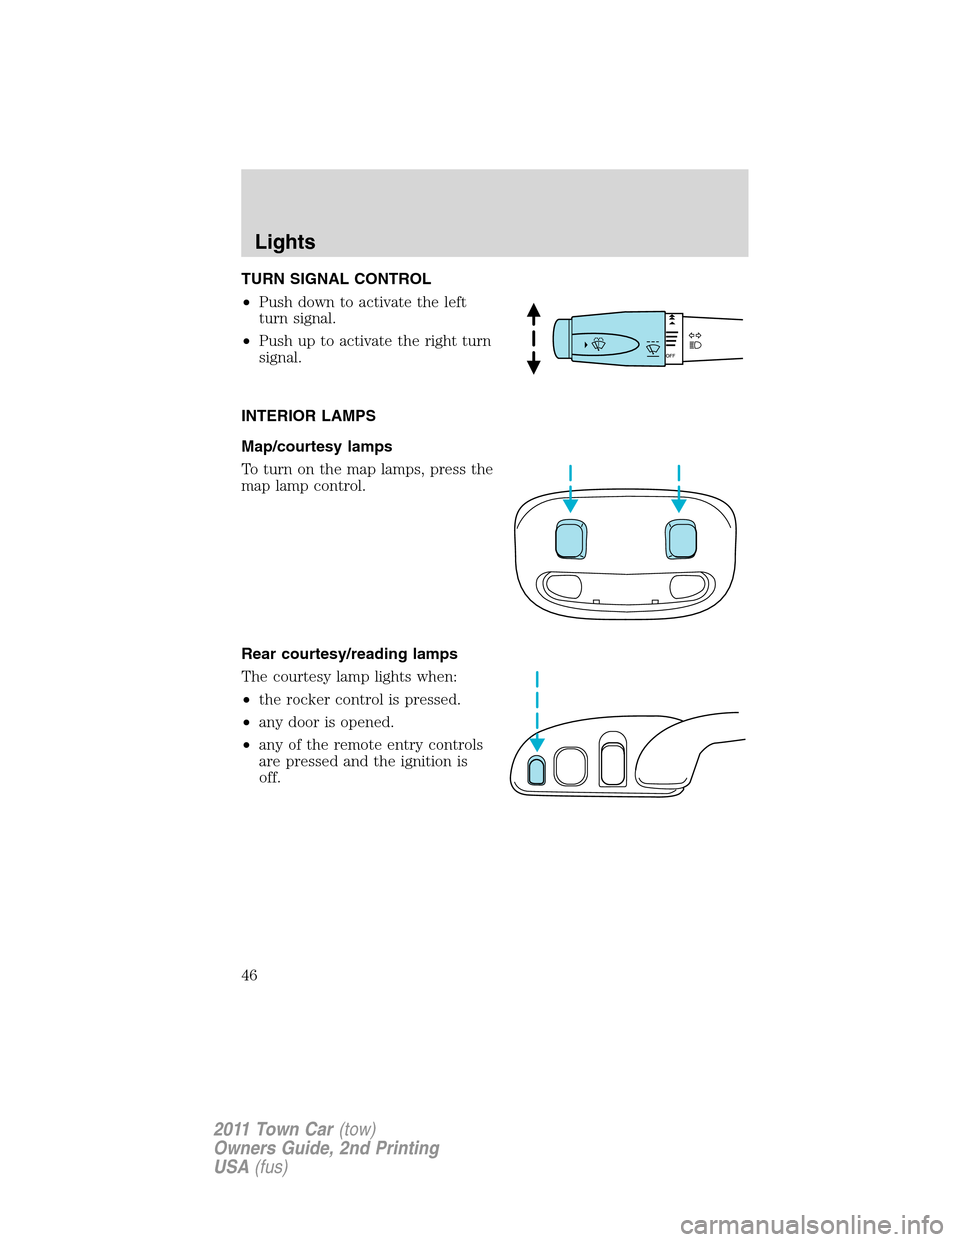 LINCOLN TOWN CAR 2011 Service Manual TURN SIGNAL CONTROL
•Push down to activate the left
turn signal.
•Push up to activate the right turn
signal.
INTERIOR LAMPS
Map/courtesy lamps
To turn on the map lamps, press the
map lamp control.